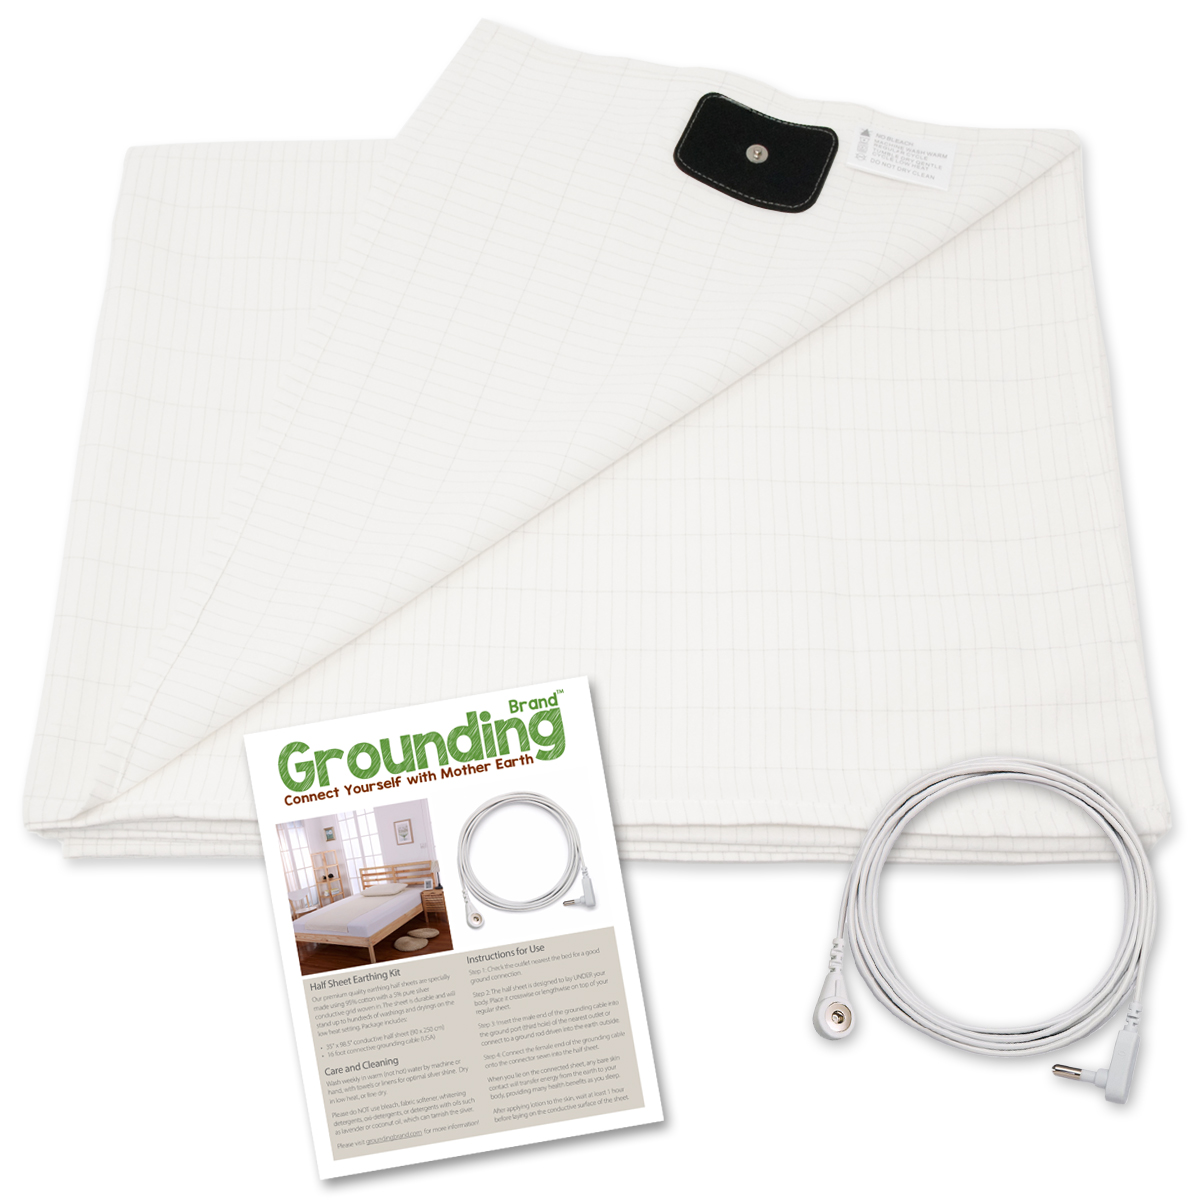 Earthing Sheets and Ground Earthing Products by Earth Potential Supplied c/w 15 ft Bed Grounding Cord Earthing Sheet for Healing Sleep and Wellbeing Earthing Grounding Fitted King Size Sheet 